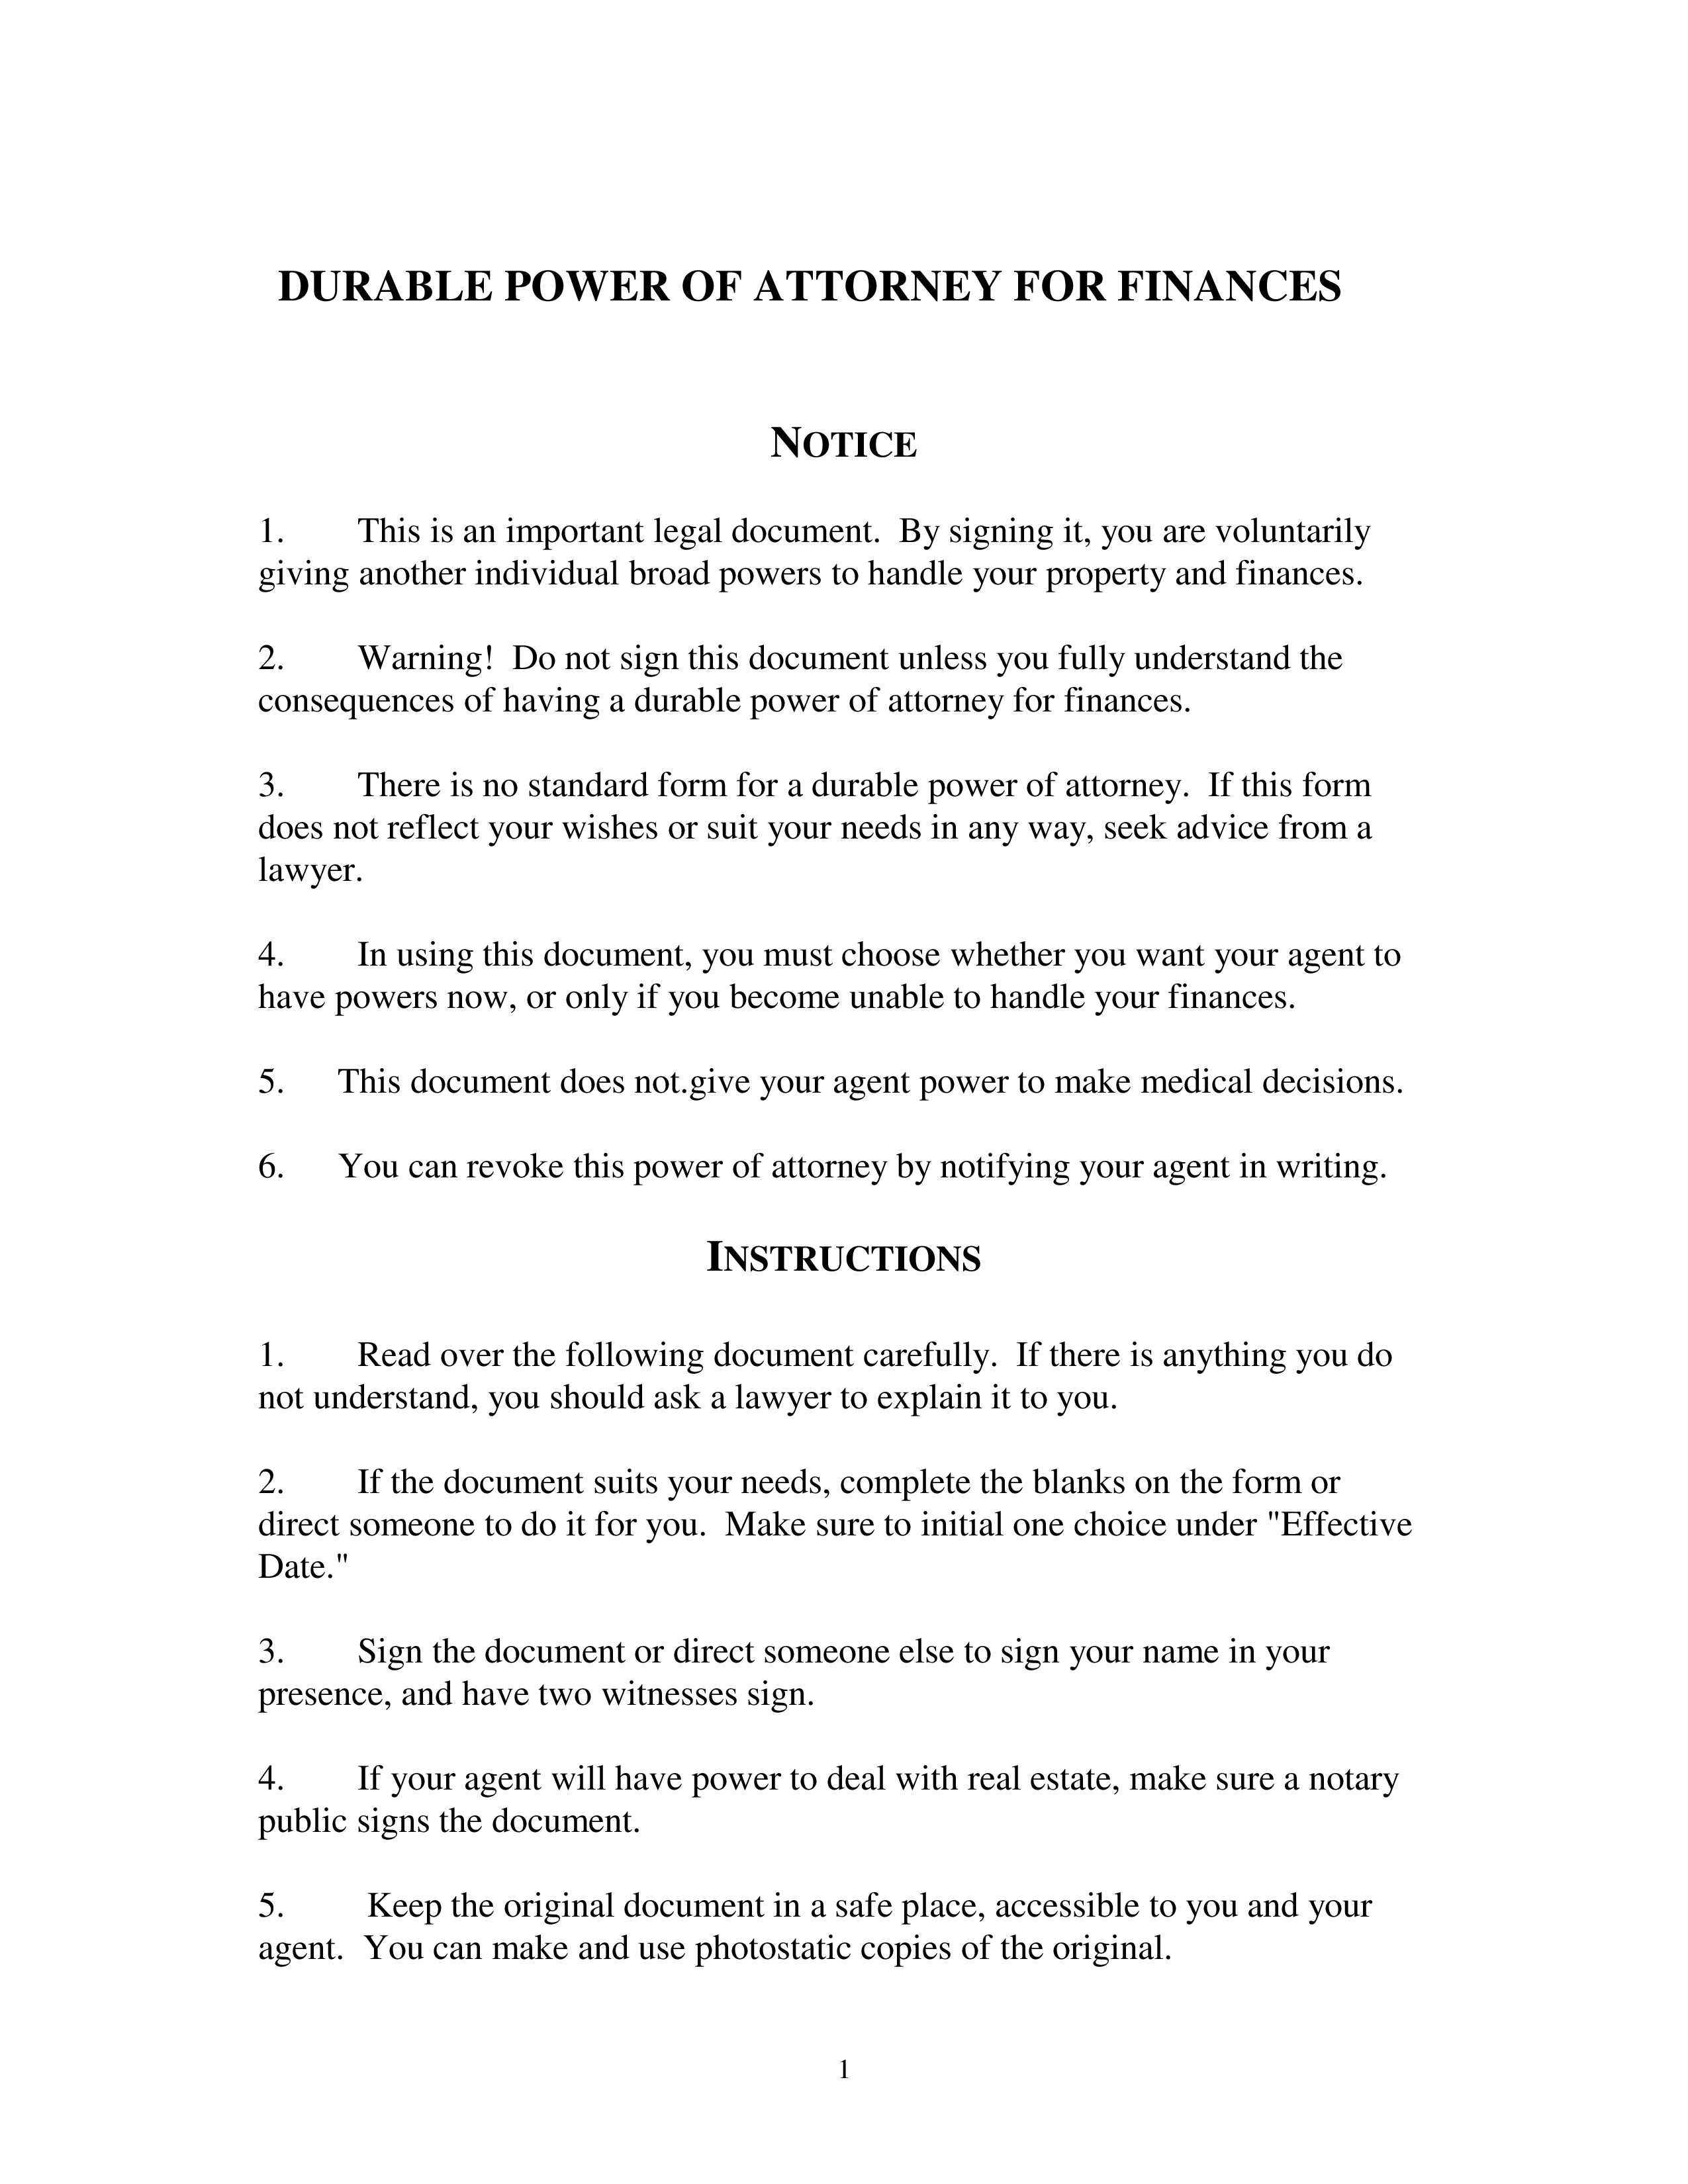 Michigan Durable Financial Power of Attorney Form